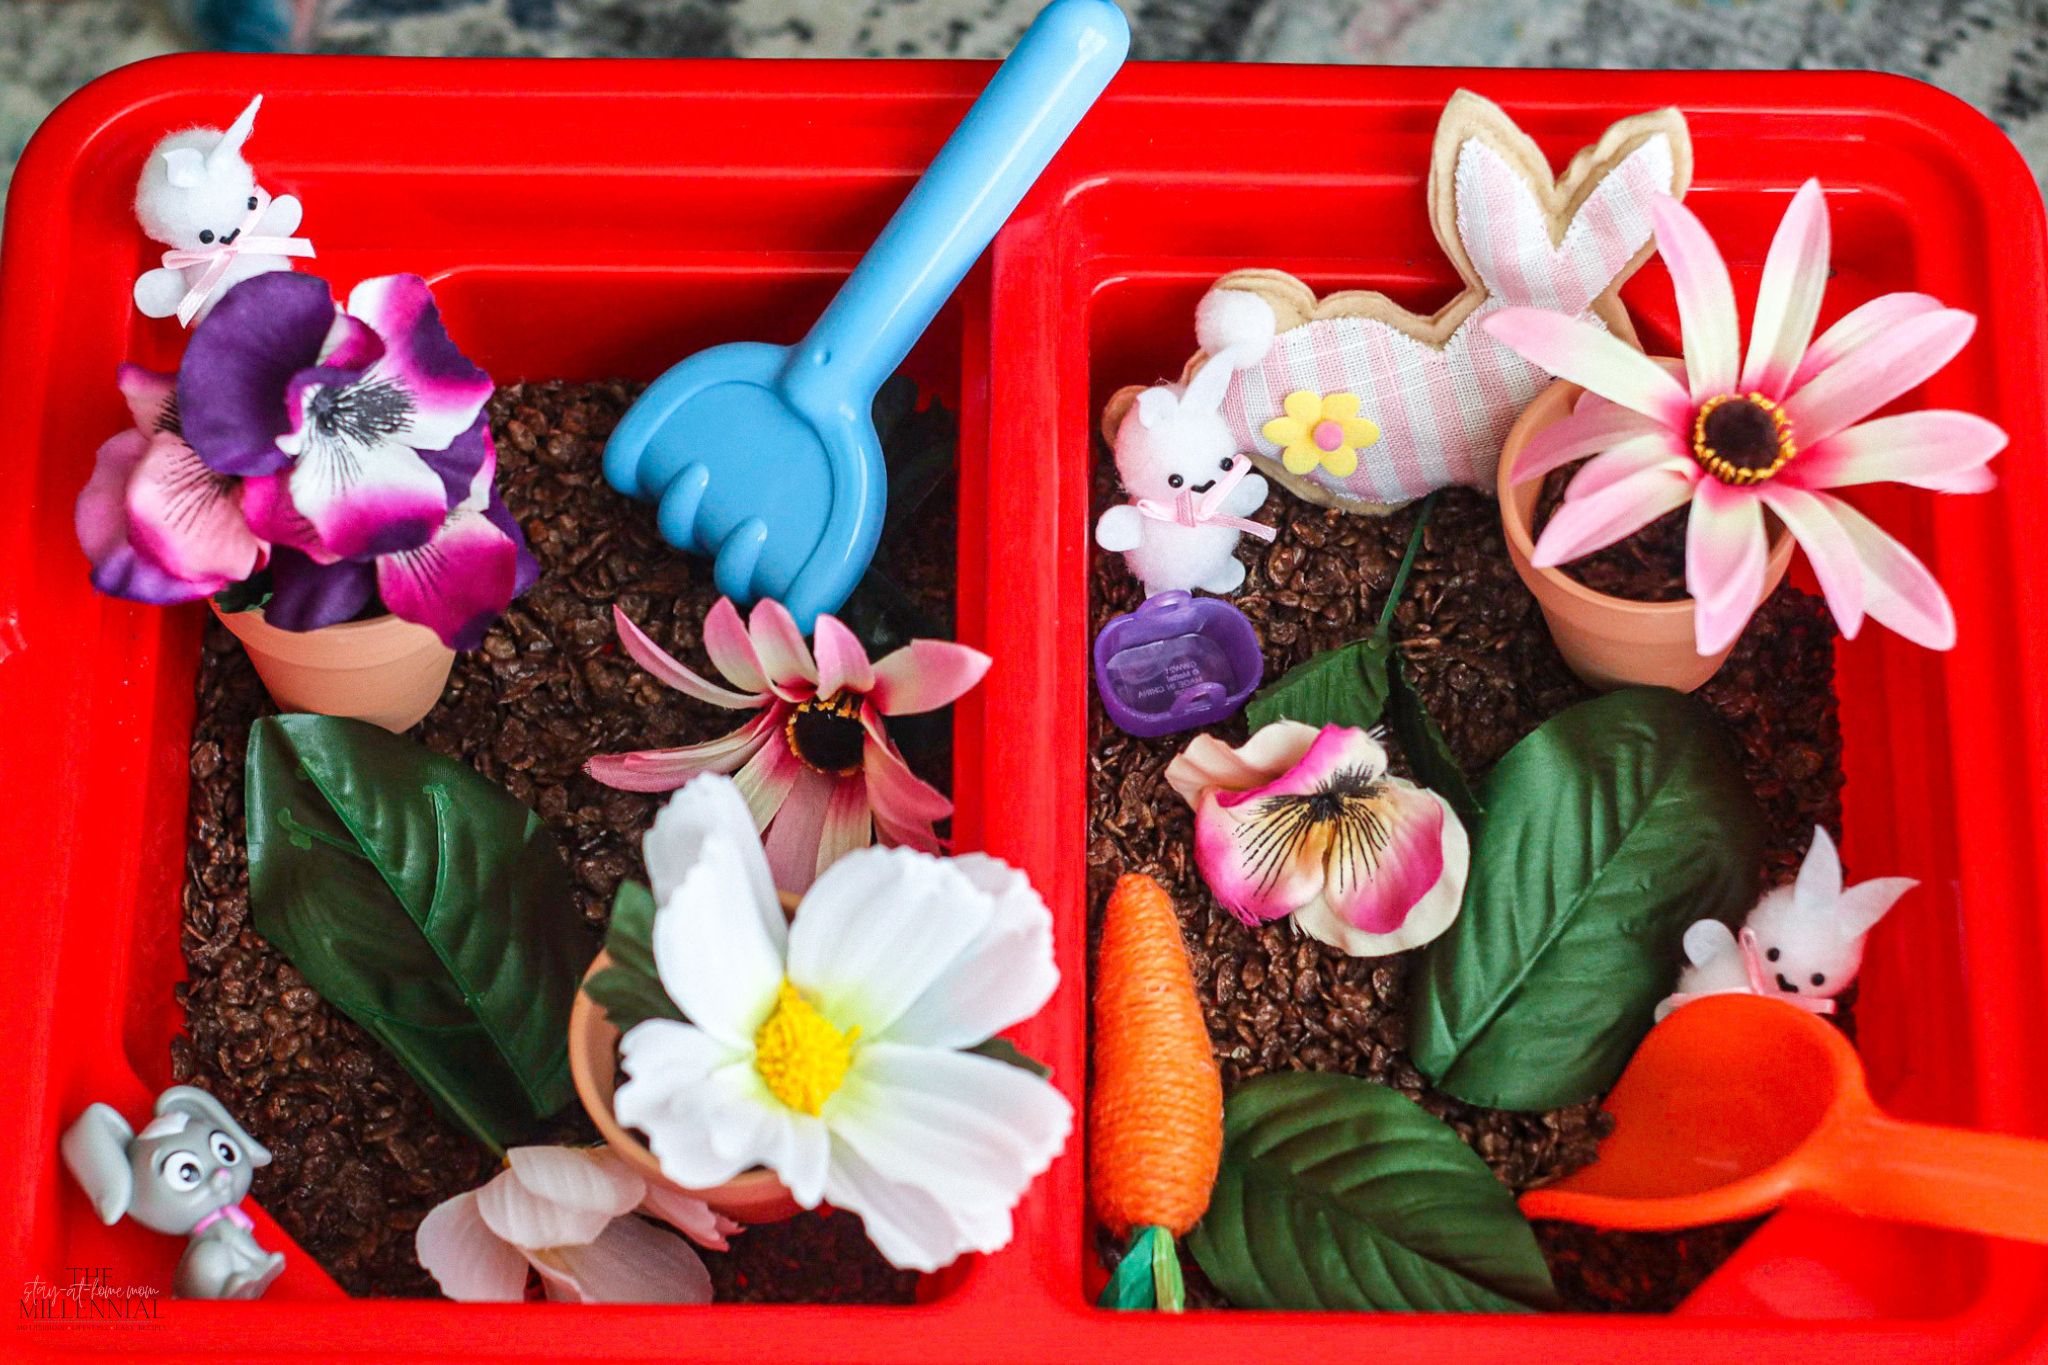 Sensory play has become a daily part of our morning routine and this garden-themed sensory table is perfect for your little learner!